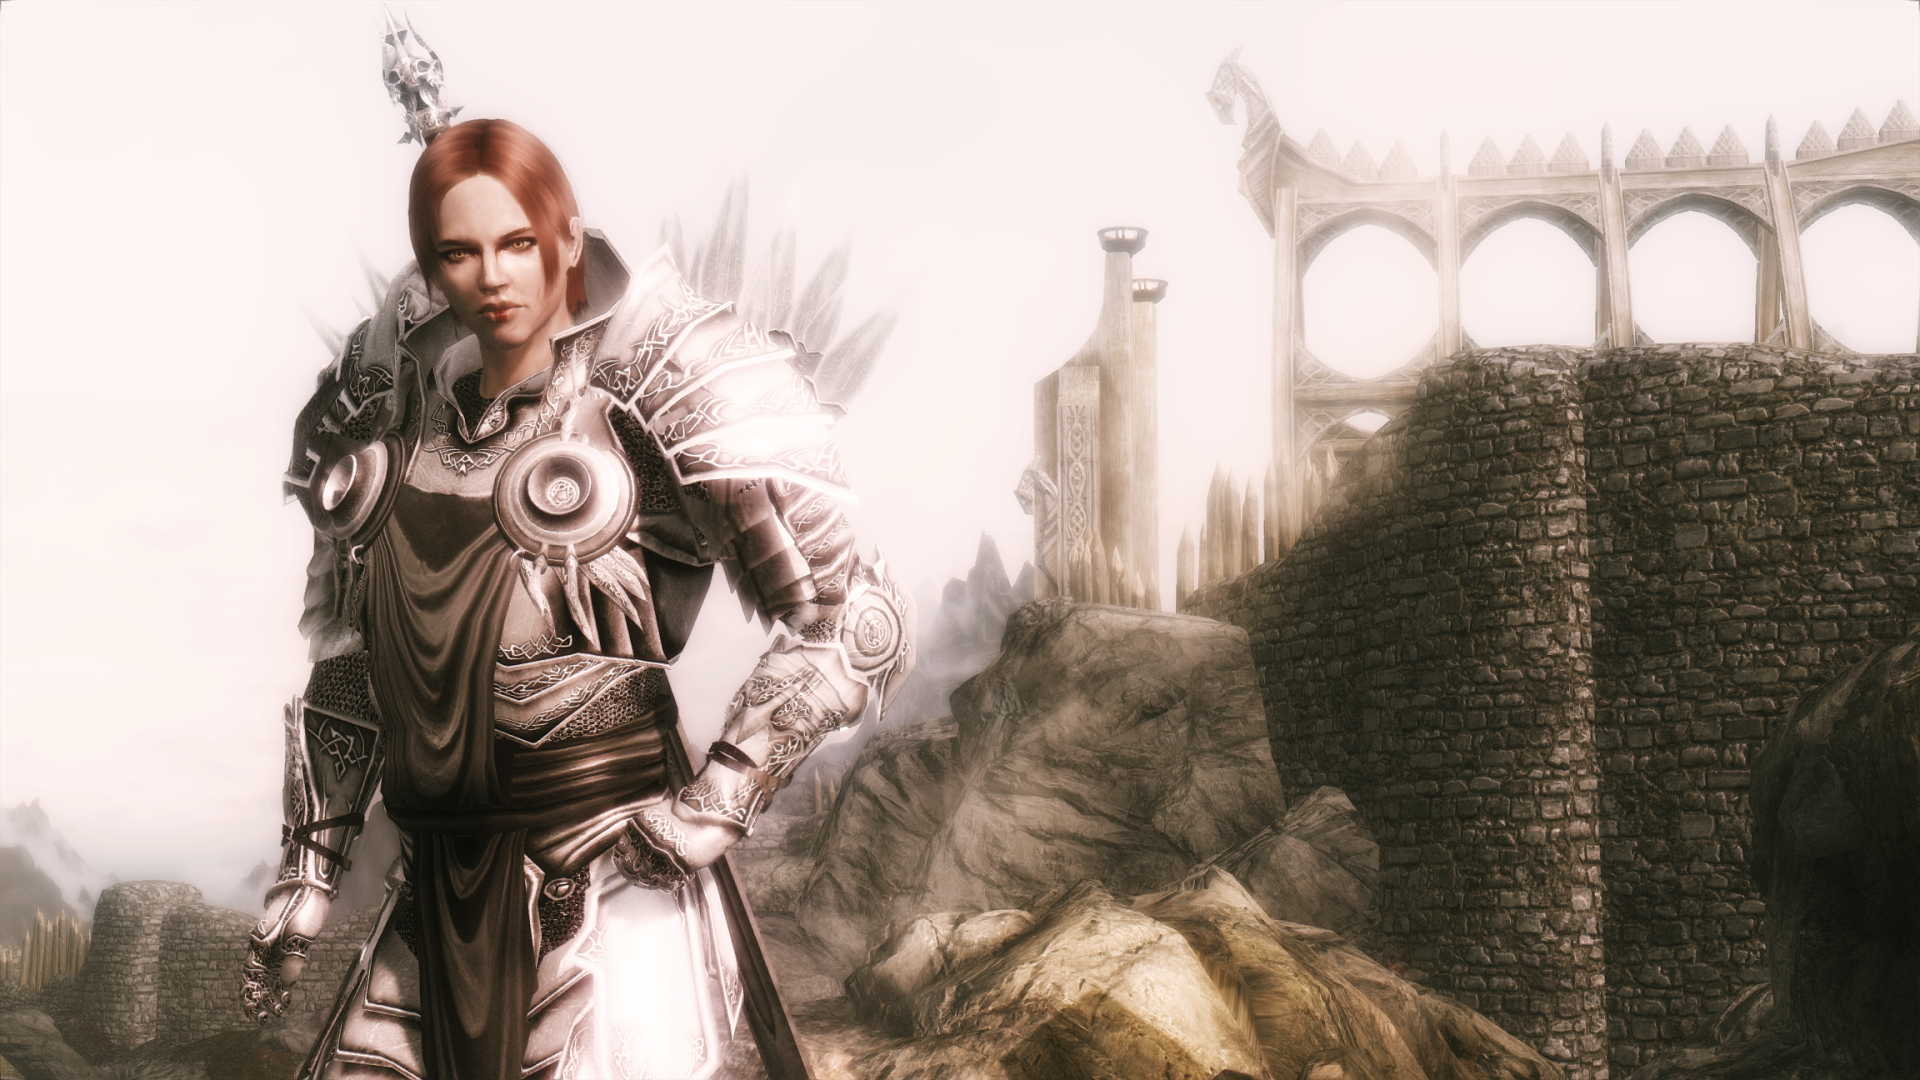 Tesv Skyrim 1080p Wallpaper Female Warrior Silver Armorpng Pictures